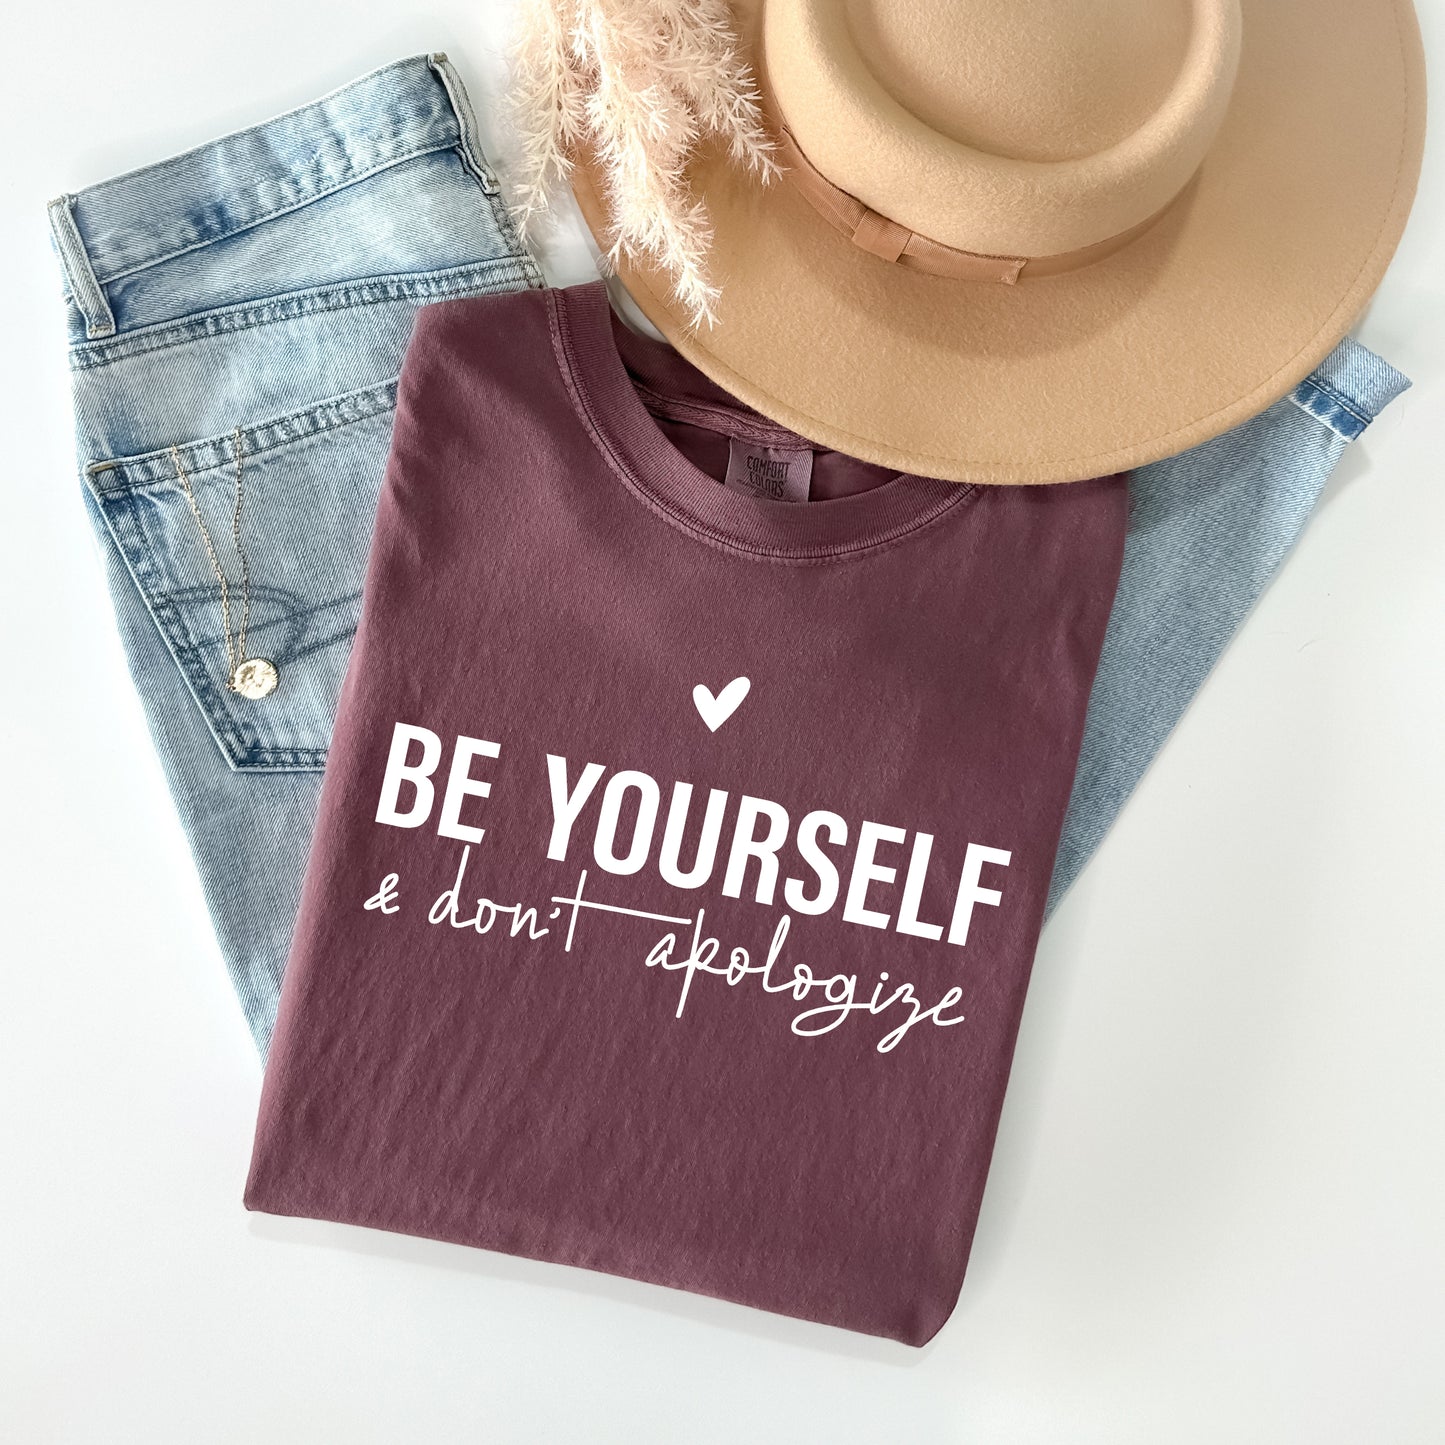 Be Yourself & Don't Apologize Graphic Tee